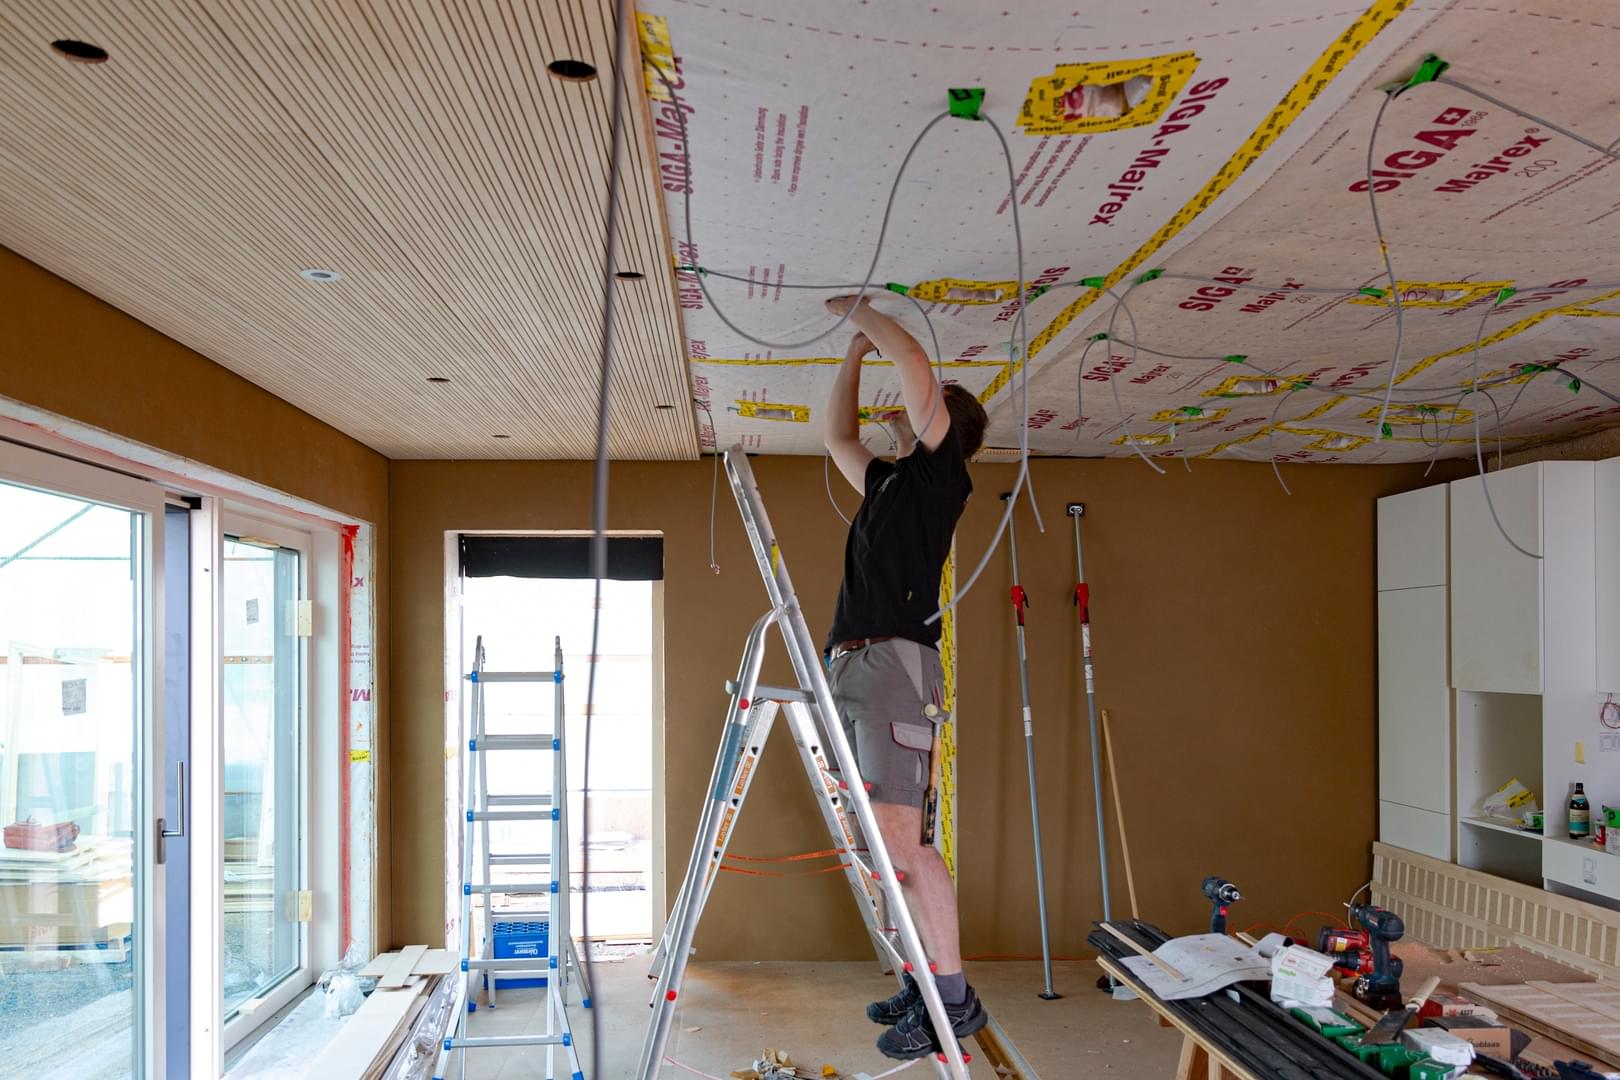 installation of power lines for lighting on the ceiling